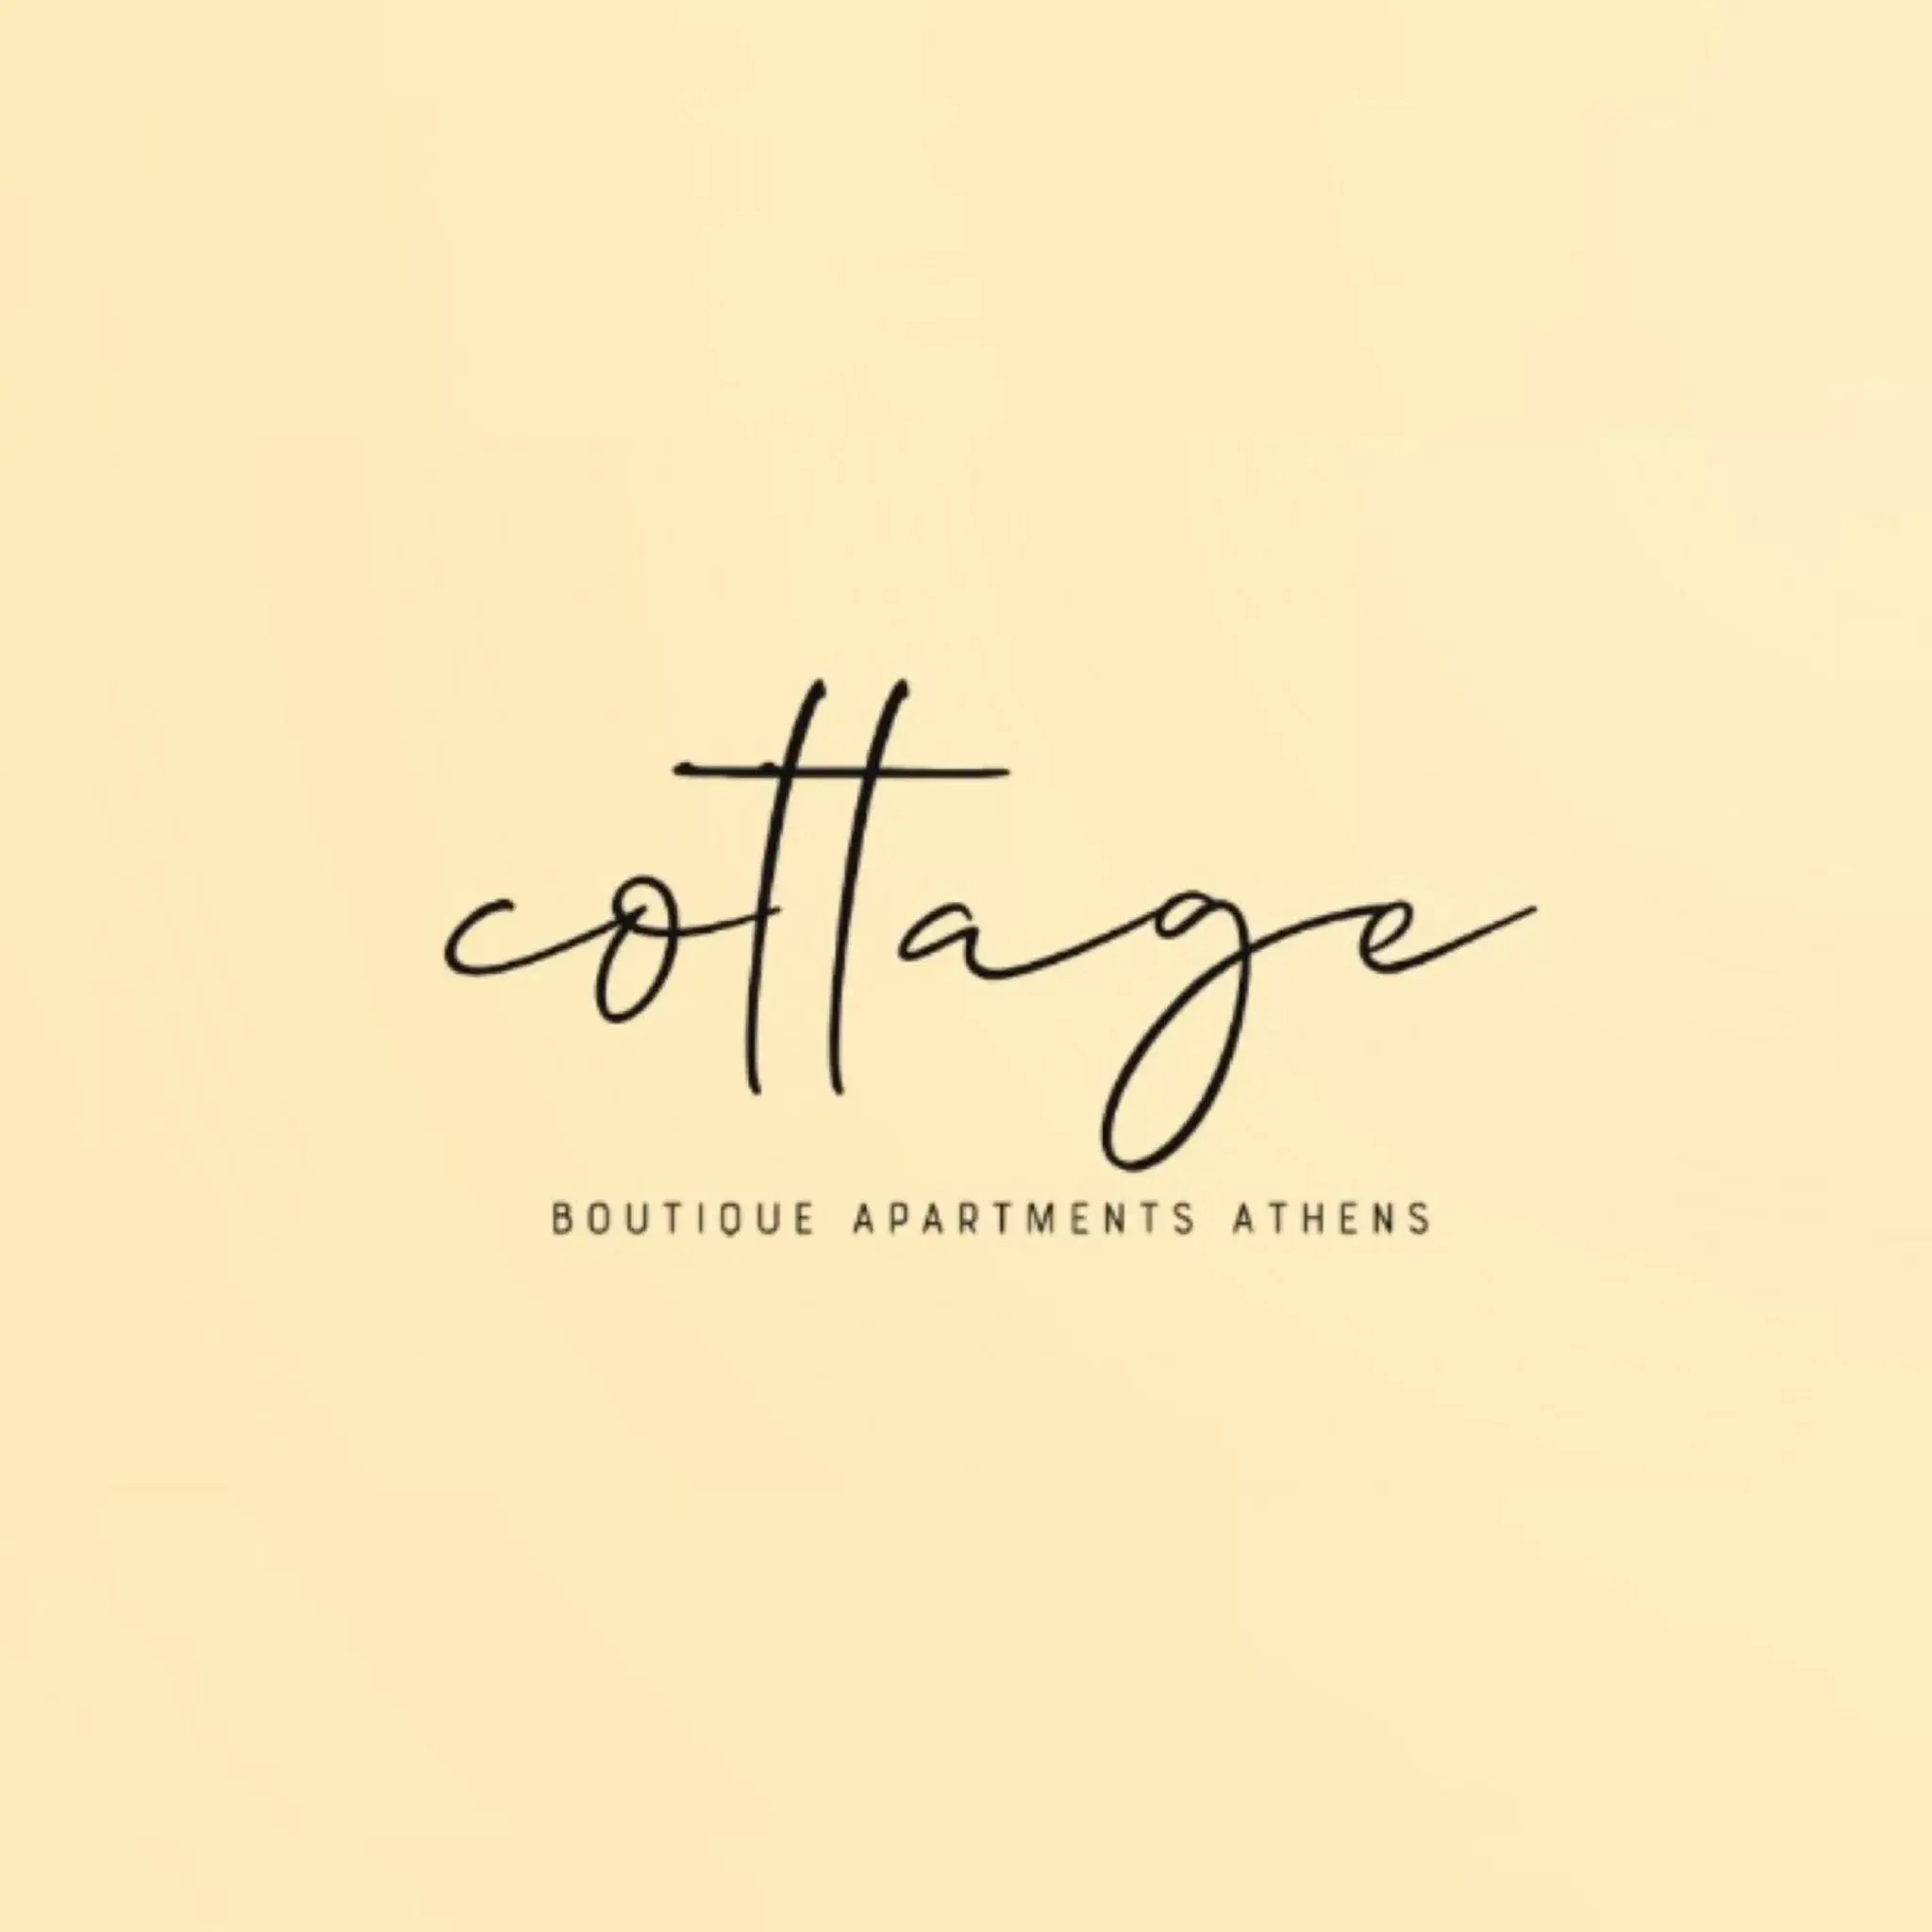 Property logo or sign in Cottage Boutique Apartments Athens